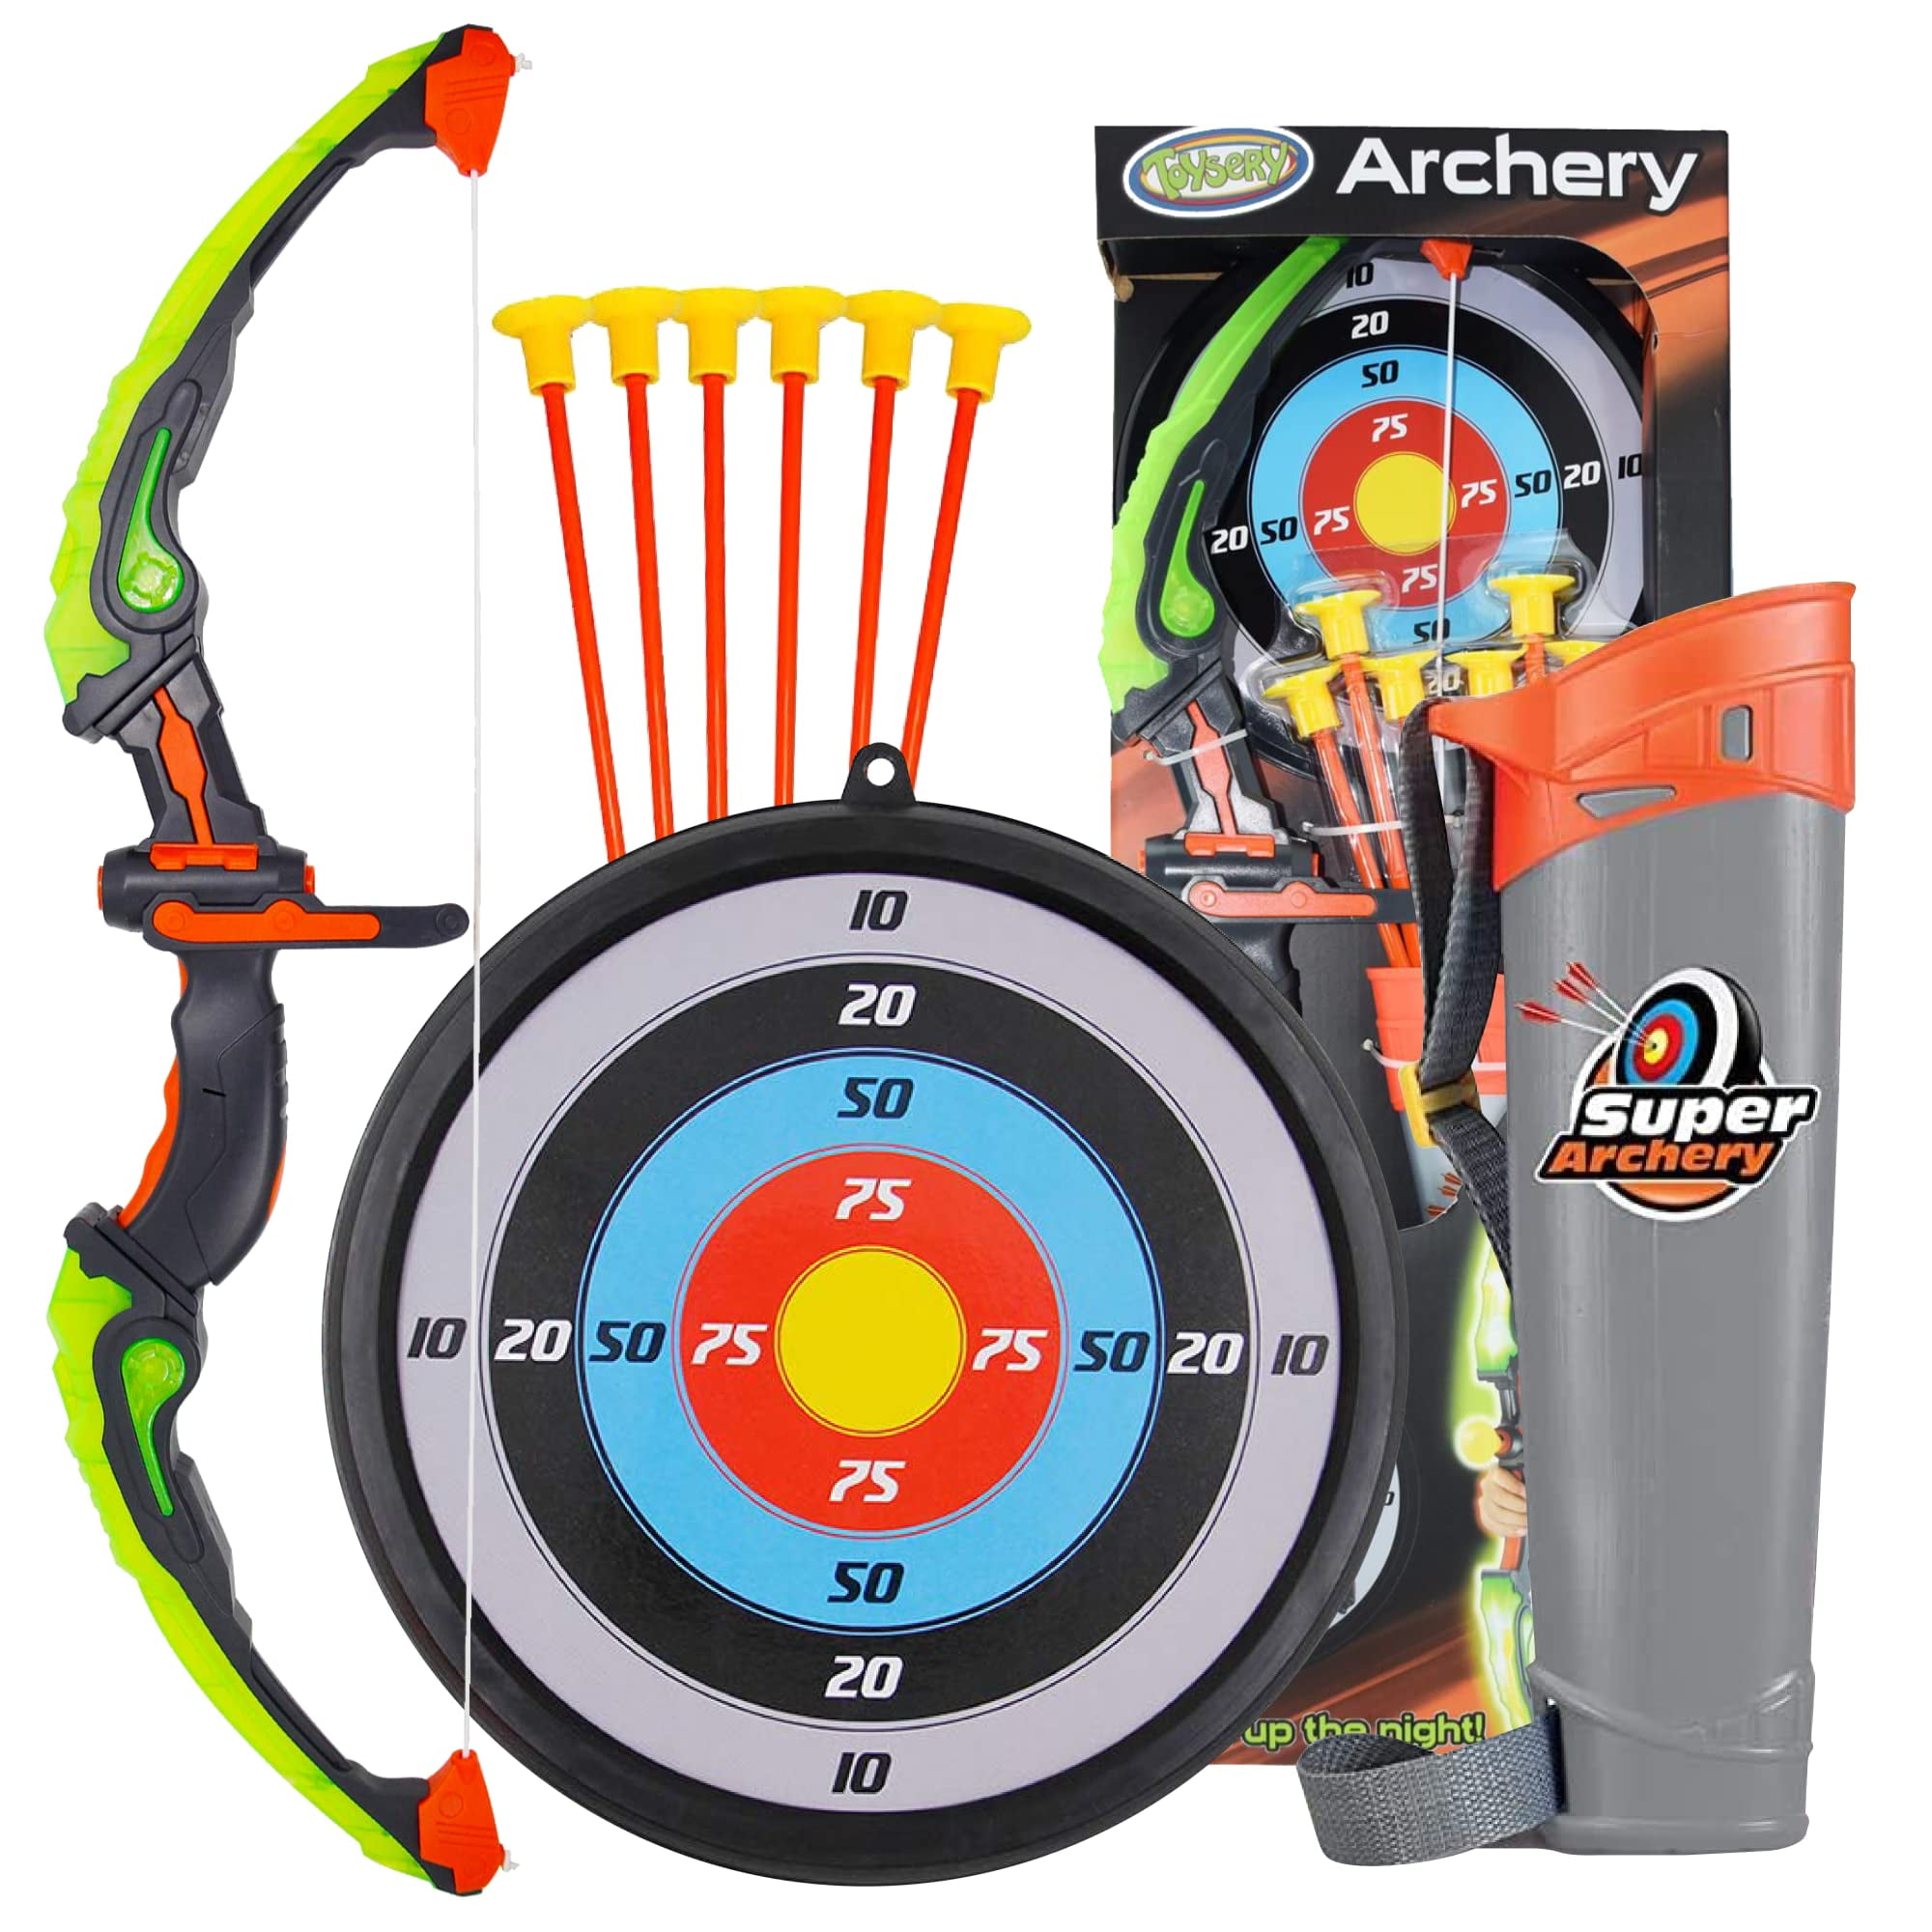 NEW ARCHERY GAME SET BOW ARROWS TOY FOR FAMILY KIDS ADULTS GARDEN PICNIC GAMES 